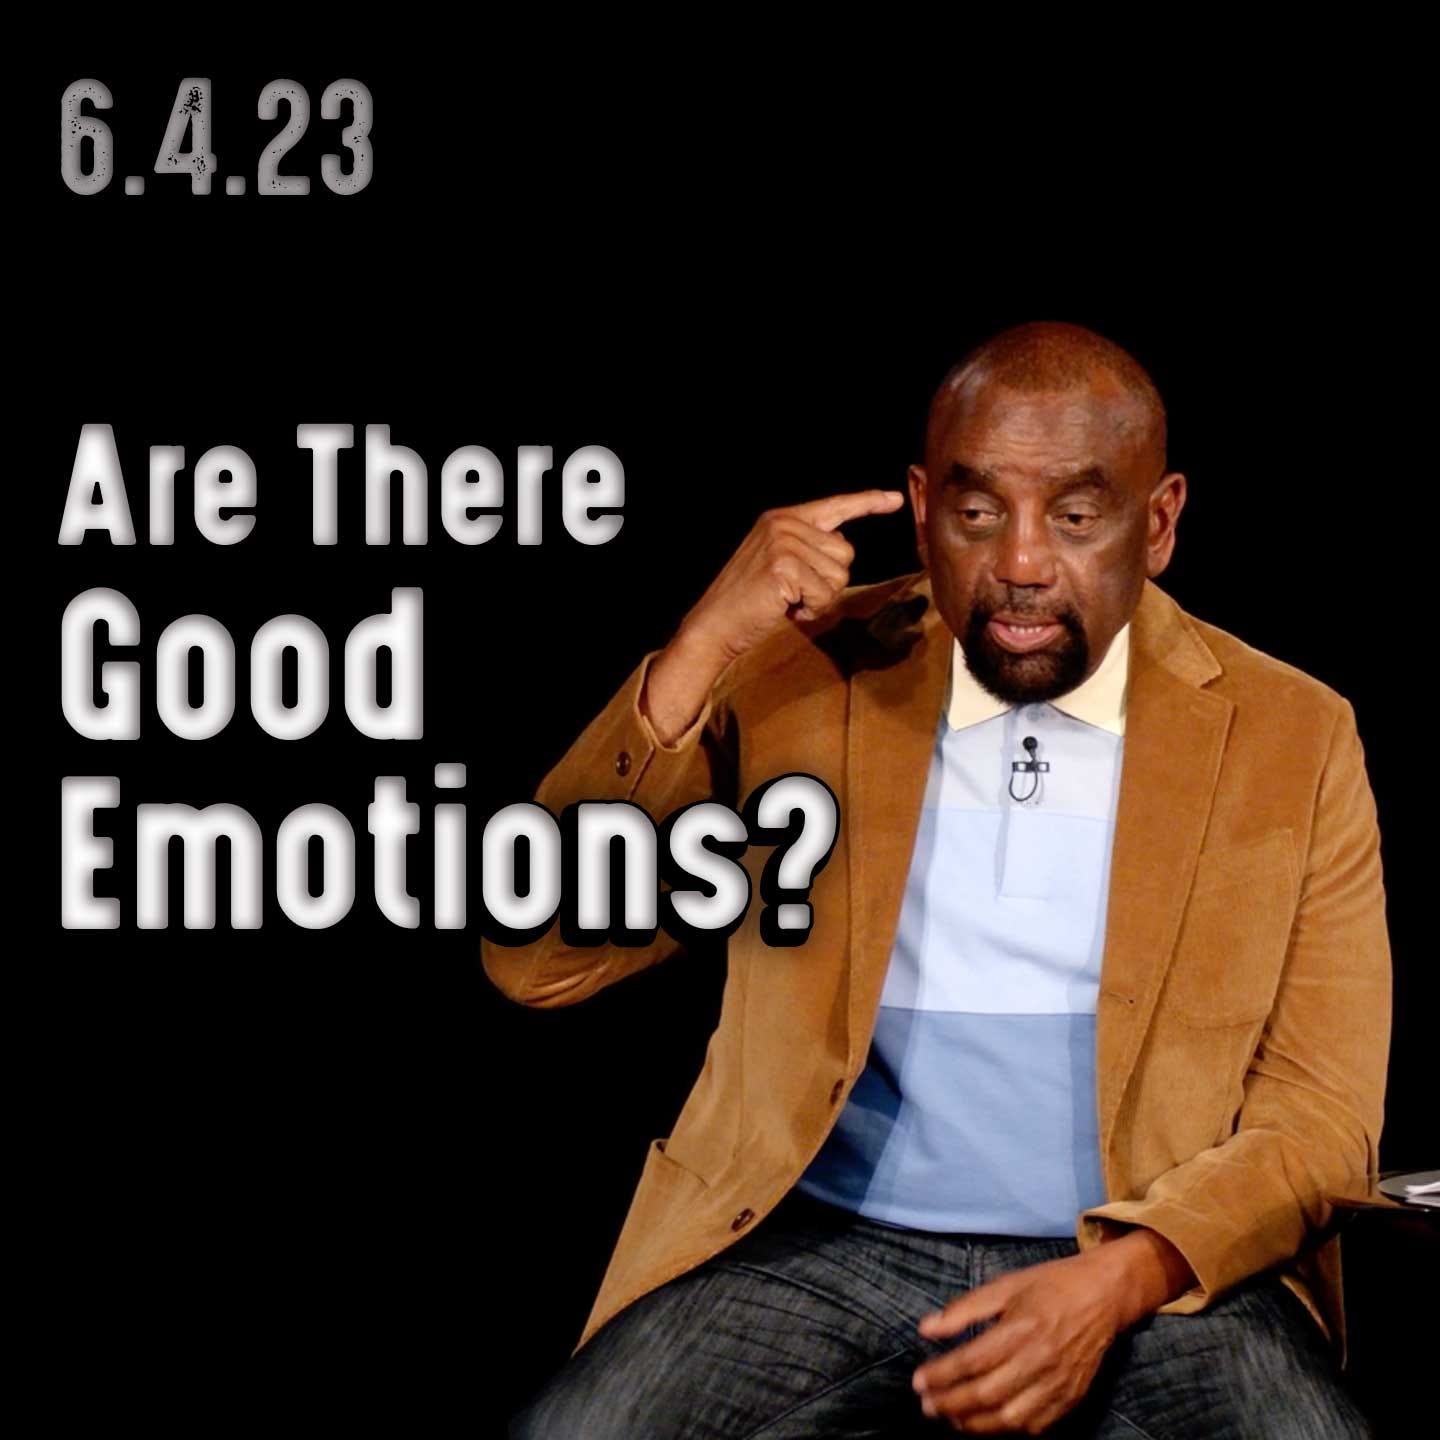 What Good Do Your Emotions Do You? | Church 6/4/23